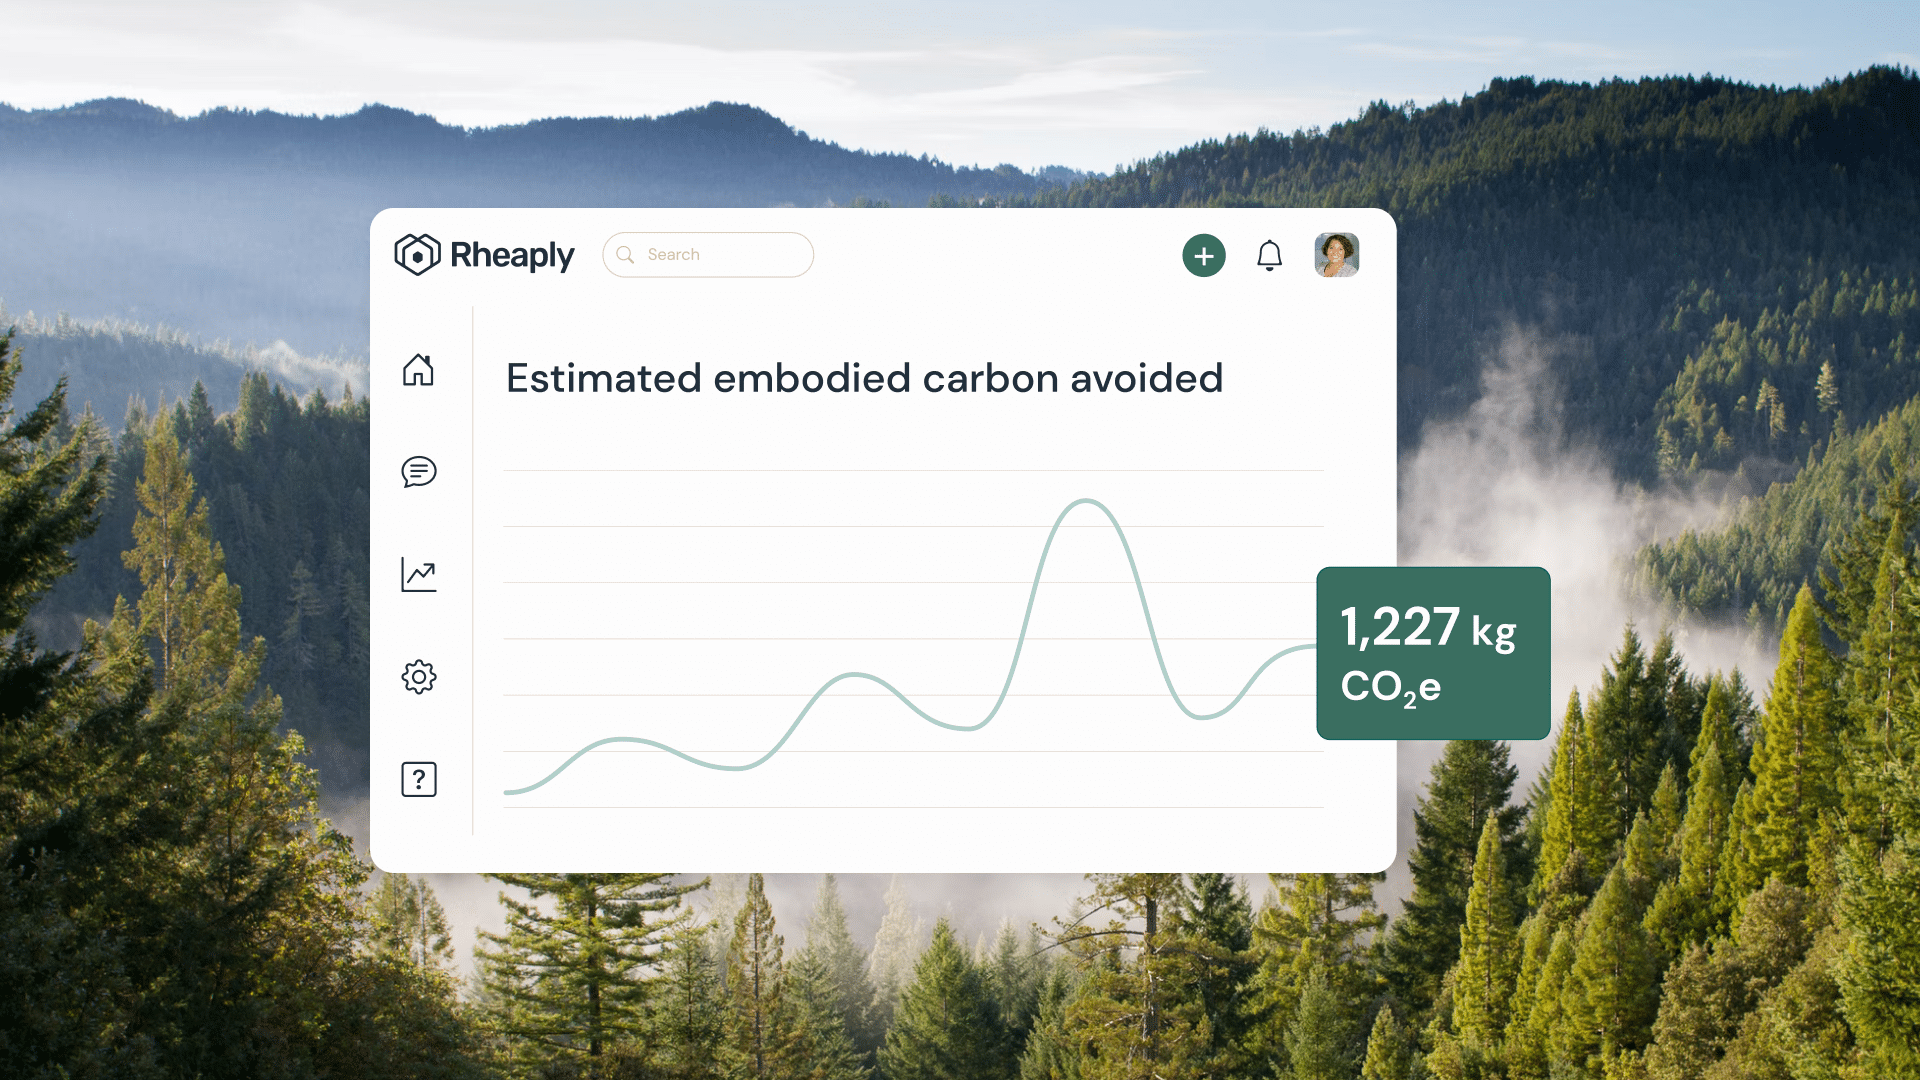 New at Rheaply: Estimated embodied carbon avoided reporting